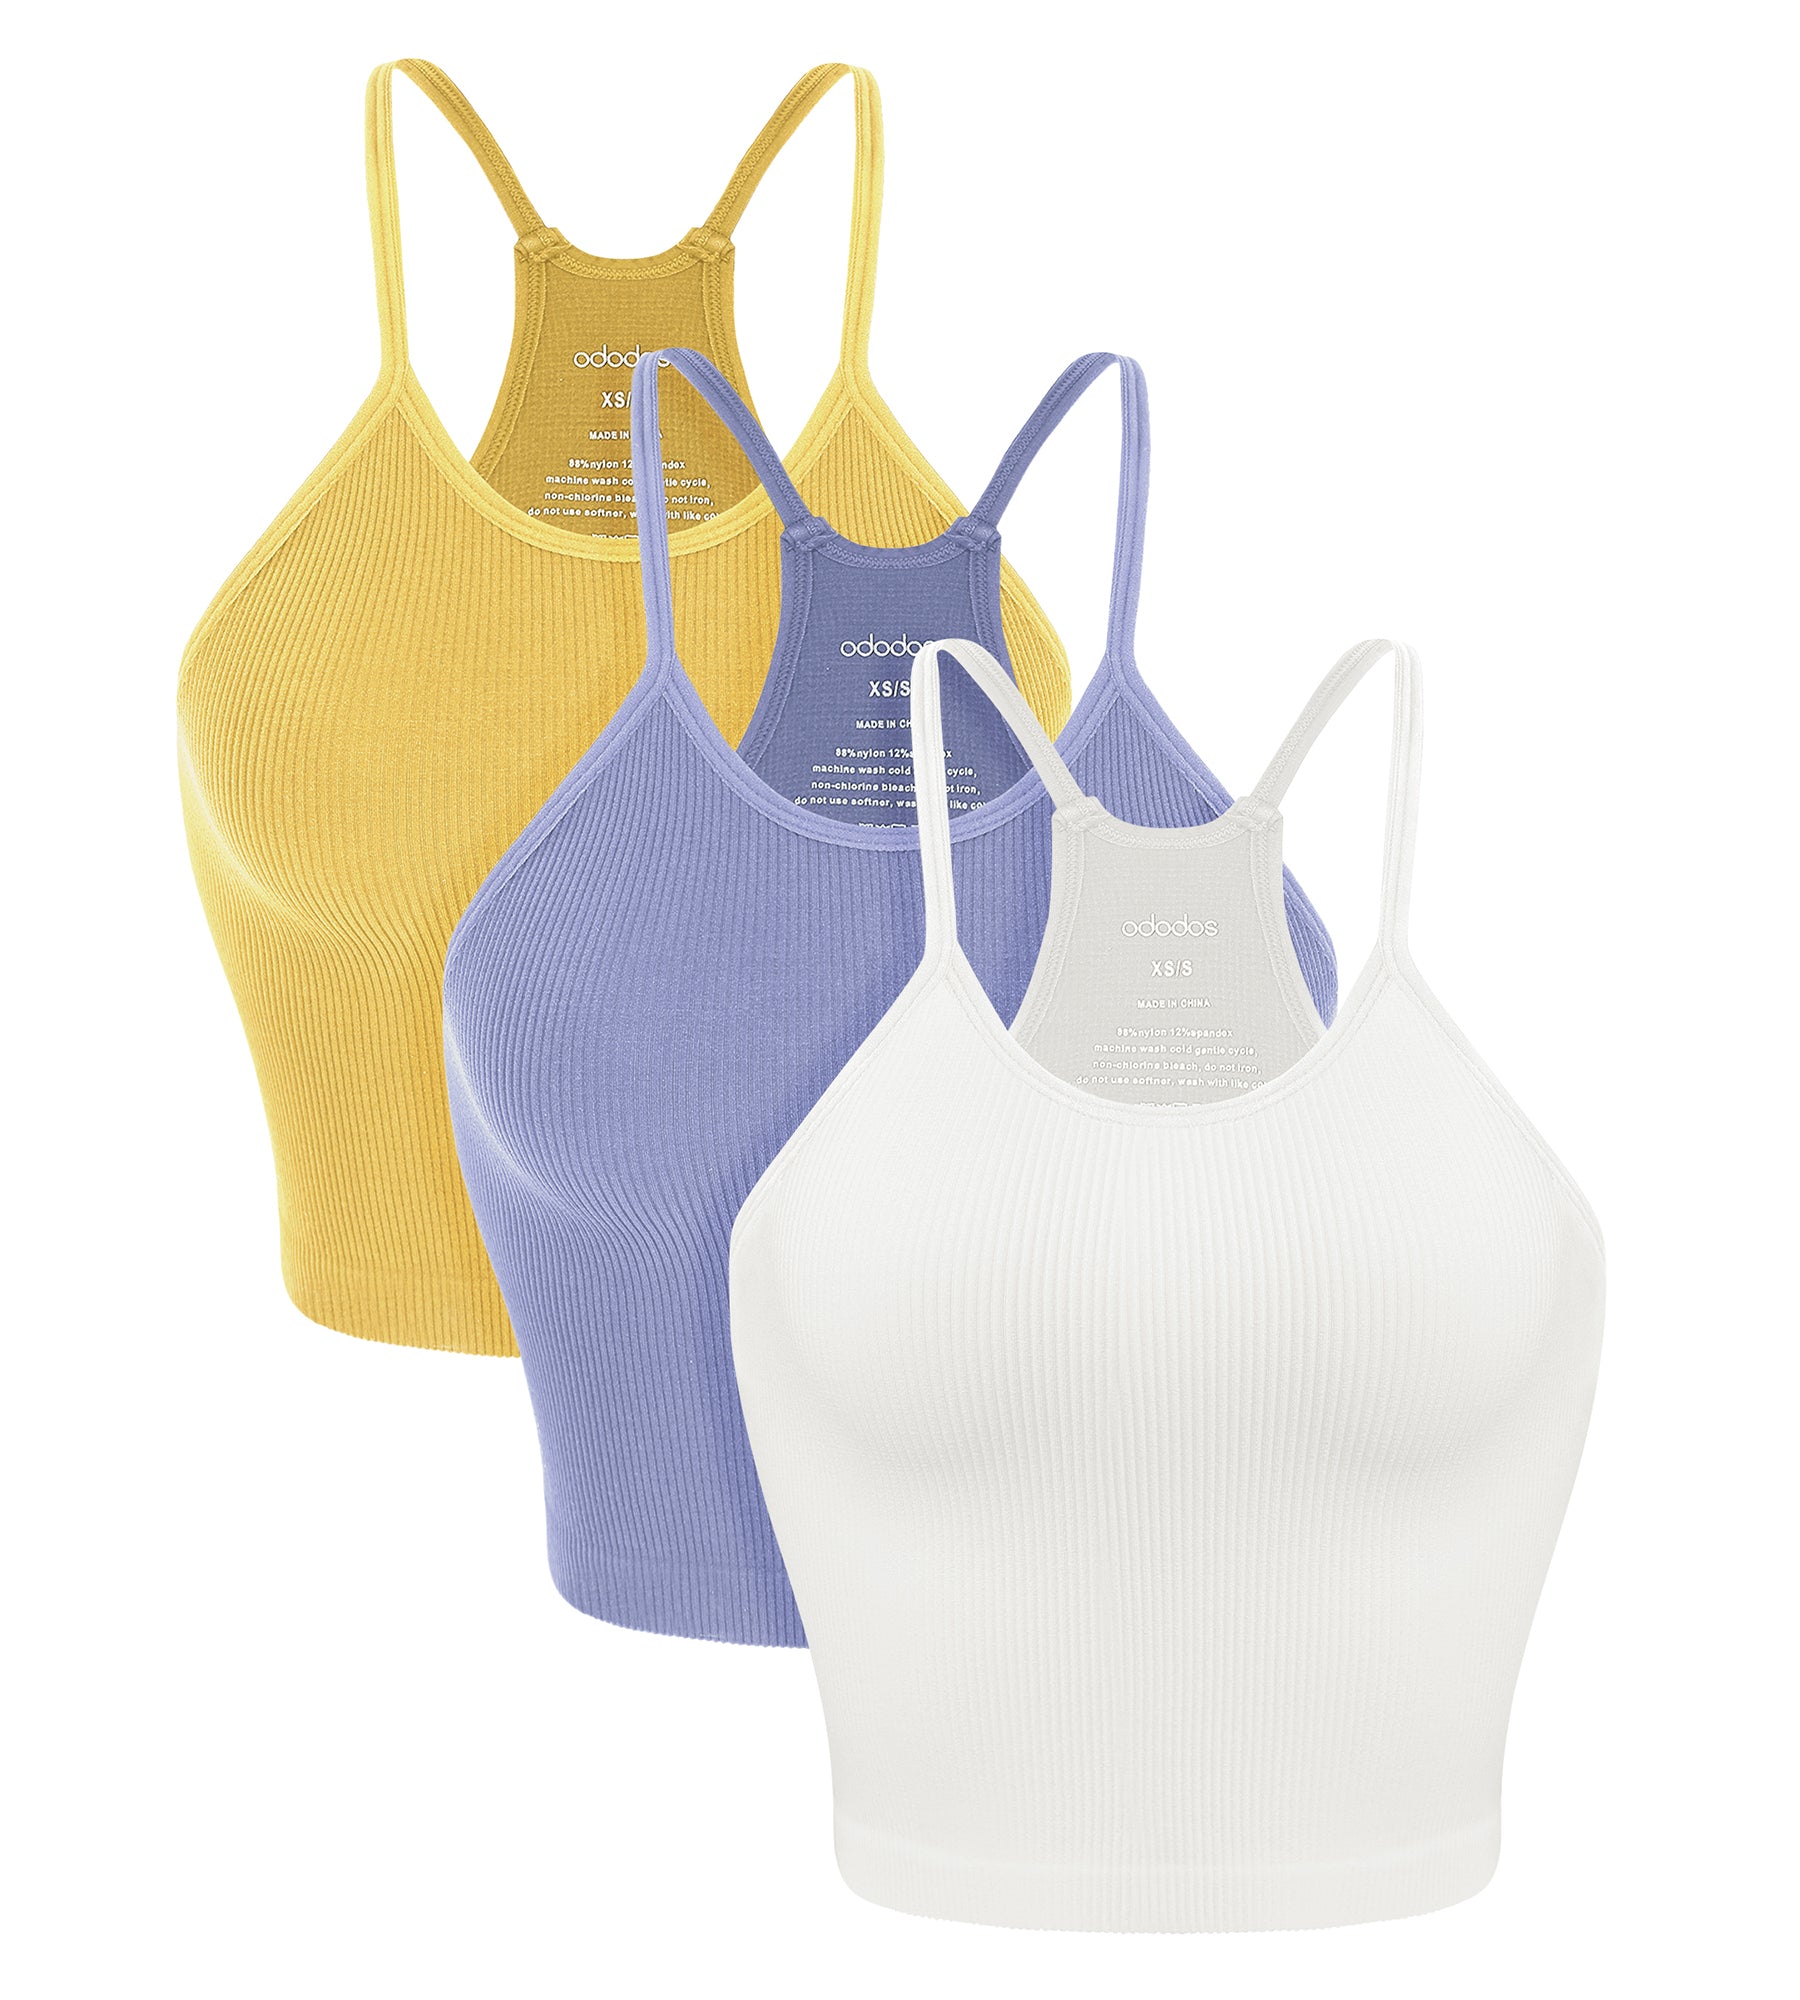 3-Pack Long Seamless Camisole White+Purple+Yellow - ododos